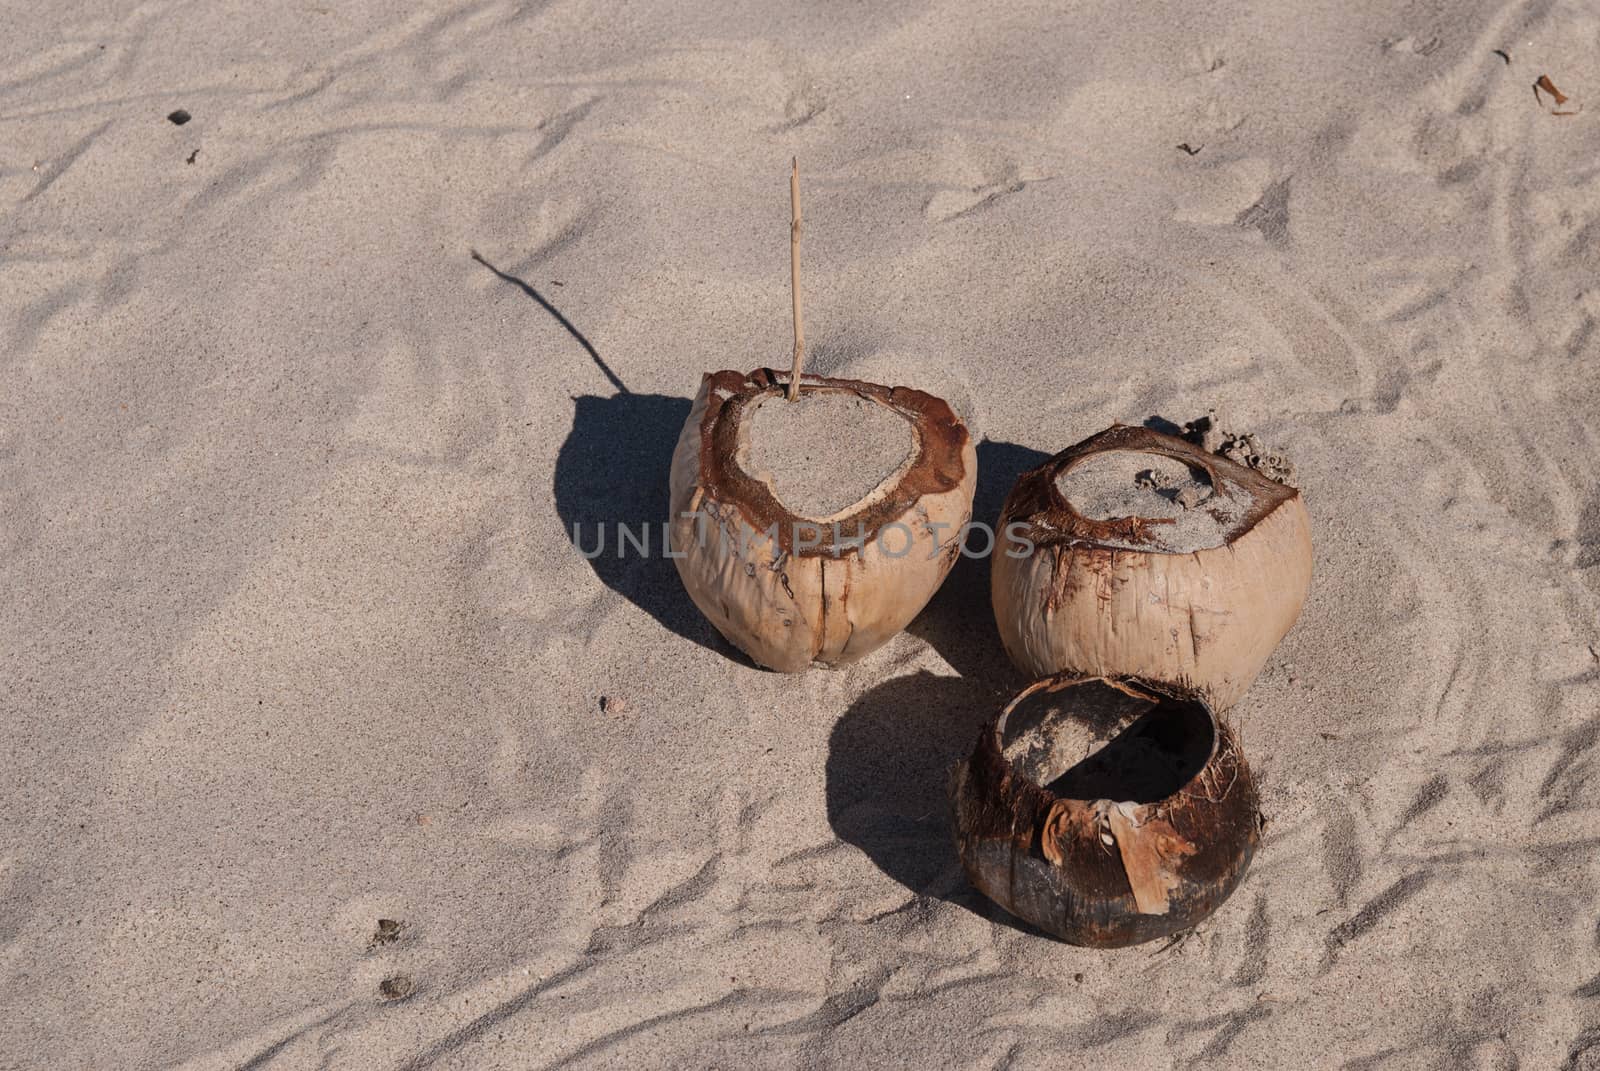 Three coconuts on a sandy beach in Mexico